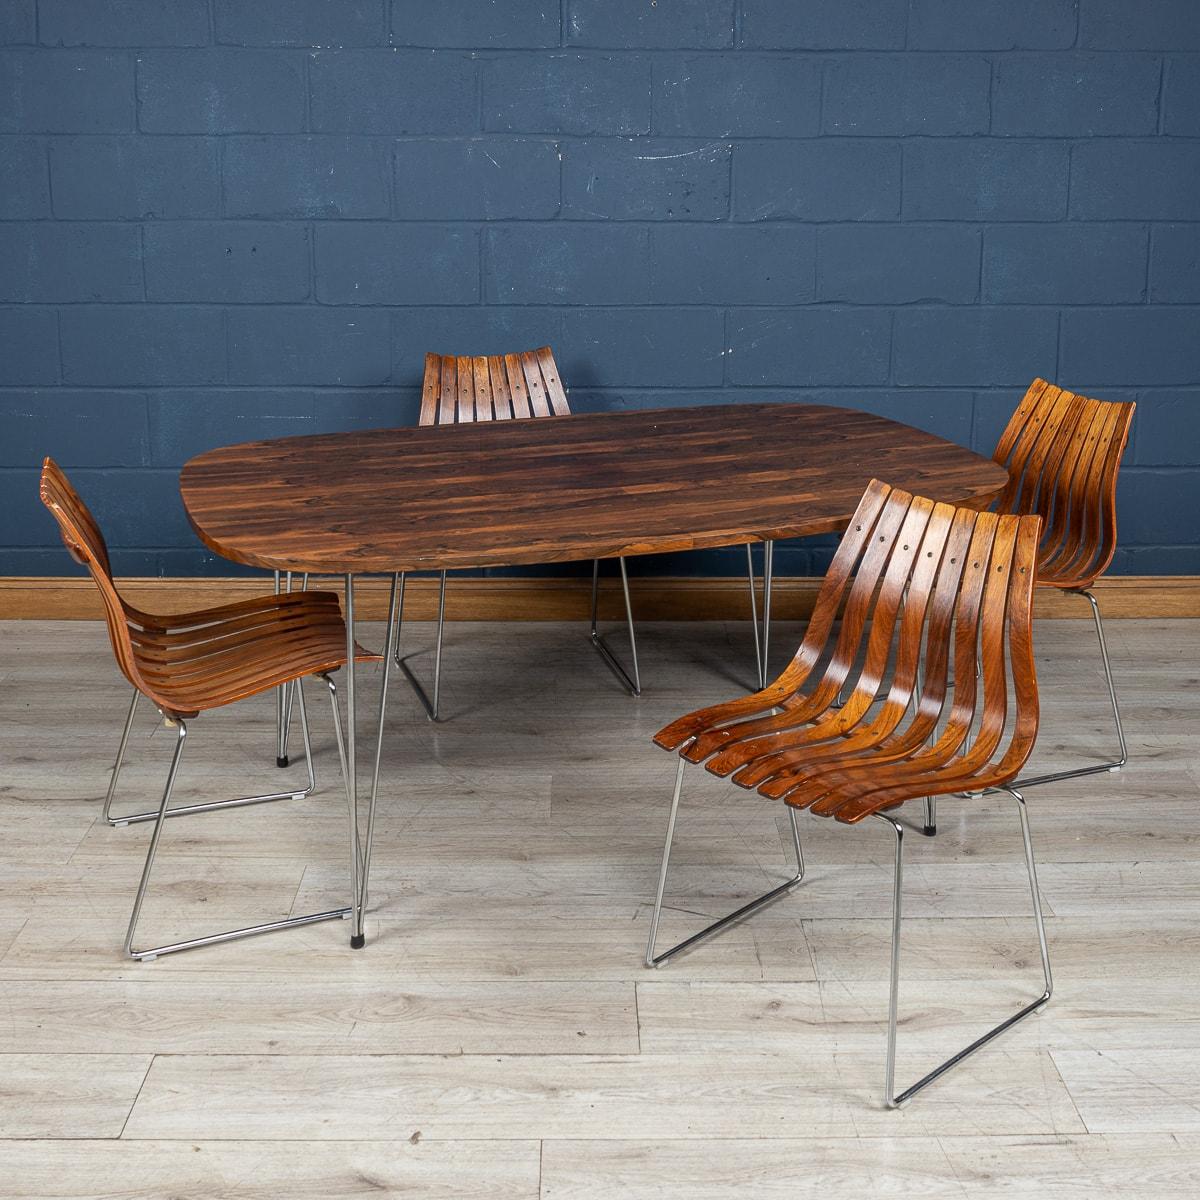 A rosewood dining table and chairs by Hans Brattrud for Hove Mobler, Norway, 1960s. This stunning set consists of four rosewood 'Scandia' dining chairs on tubular steel supports, together with a 'Scandia' dining table. The table top is formed from